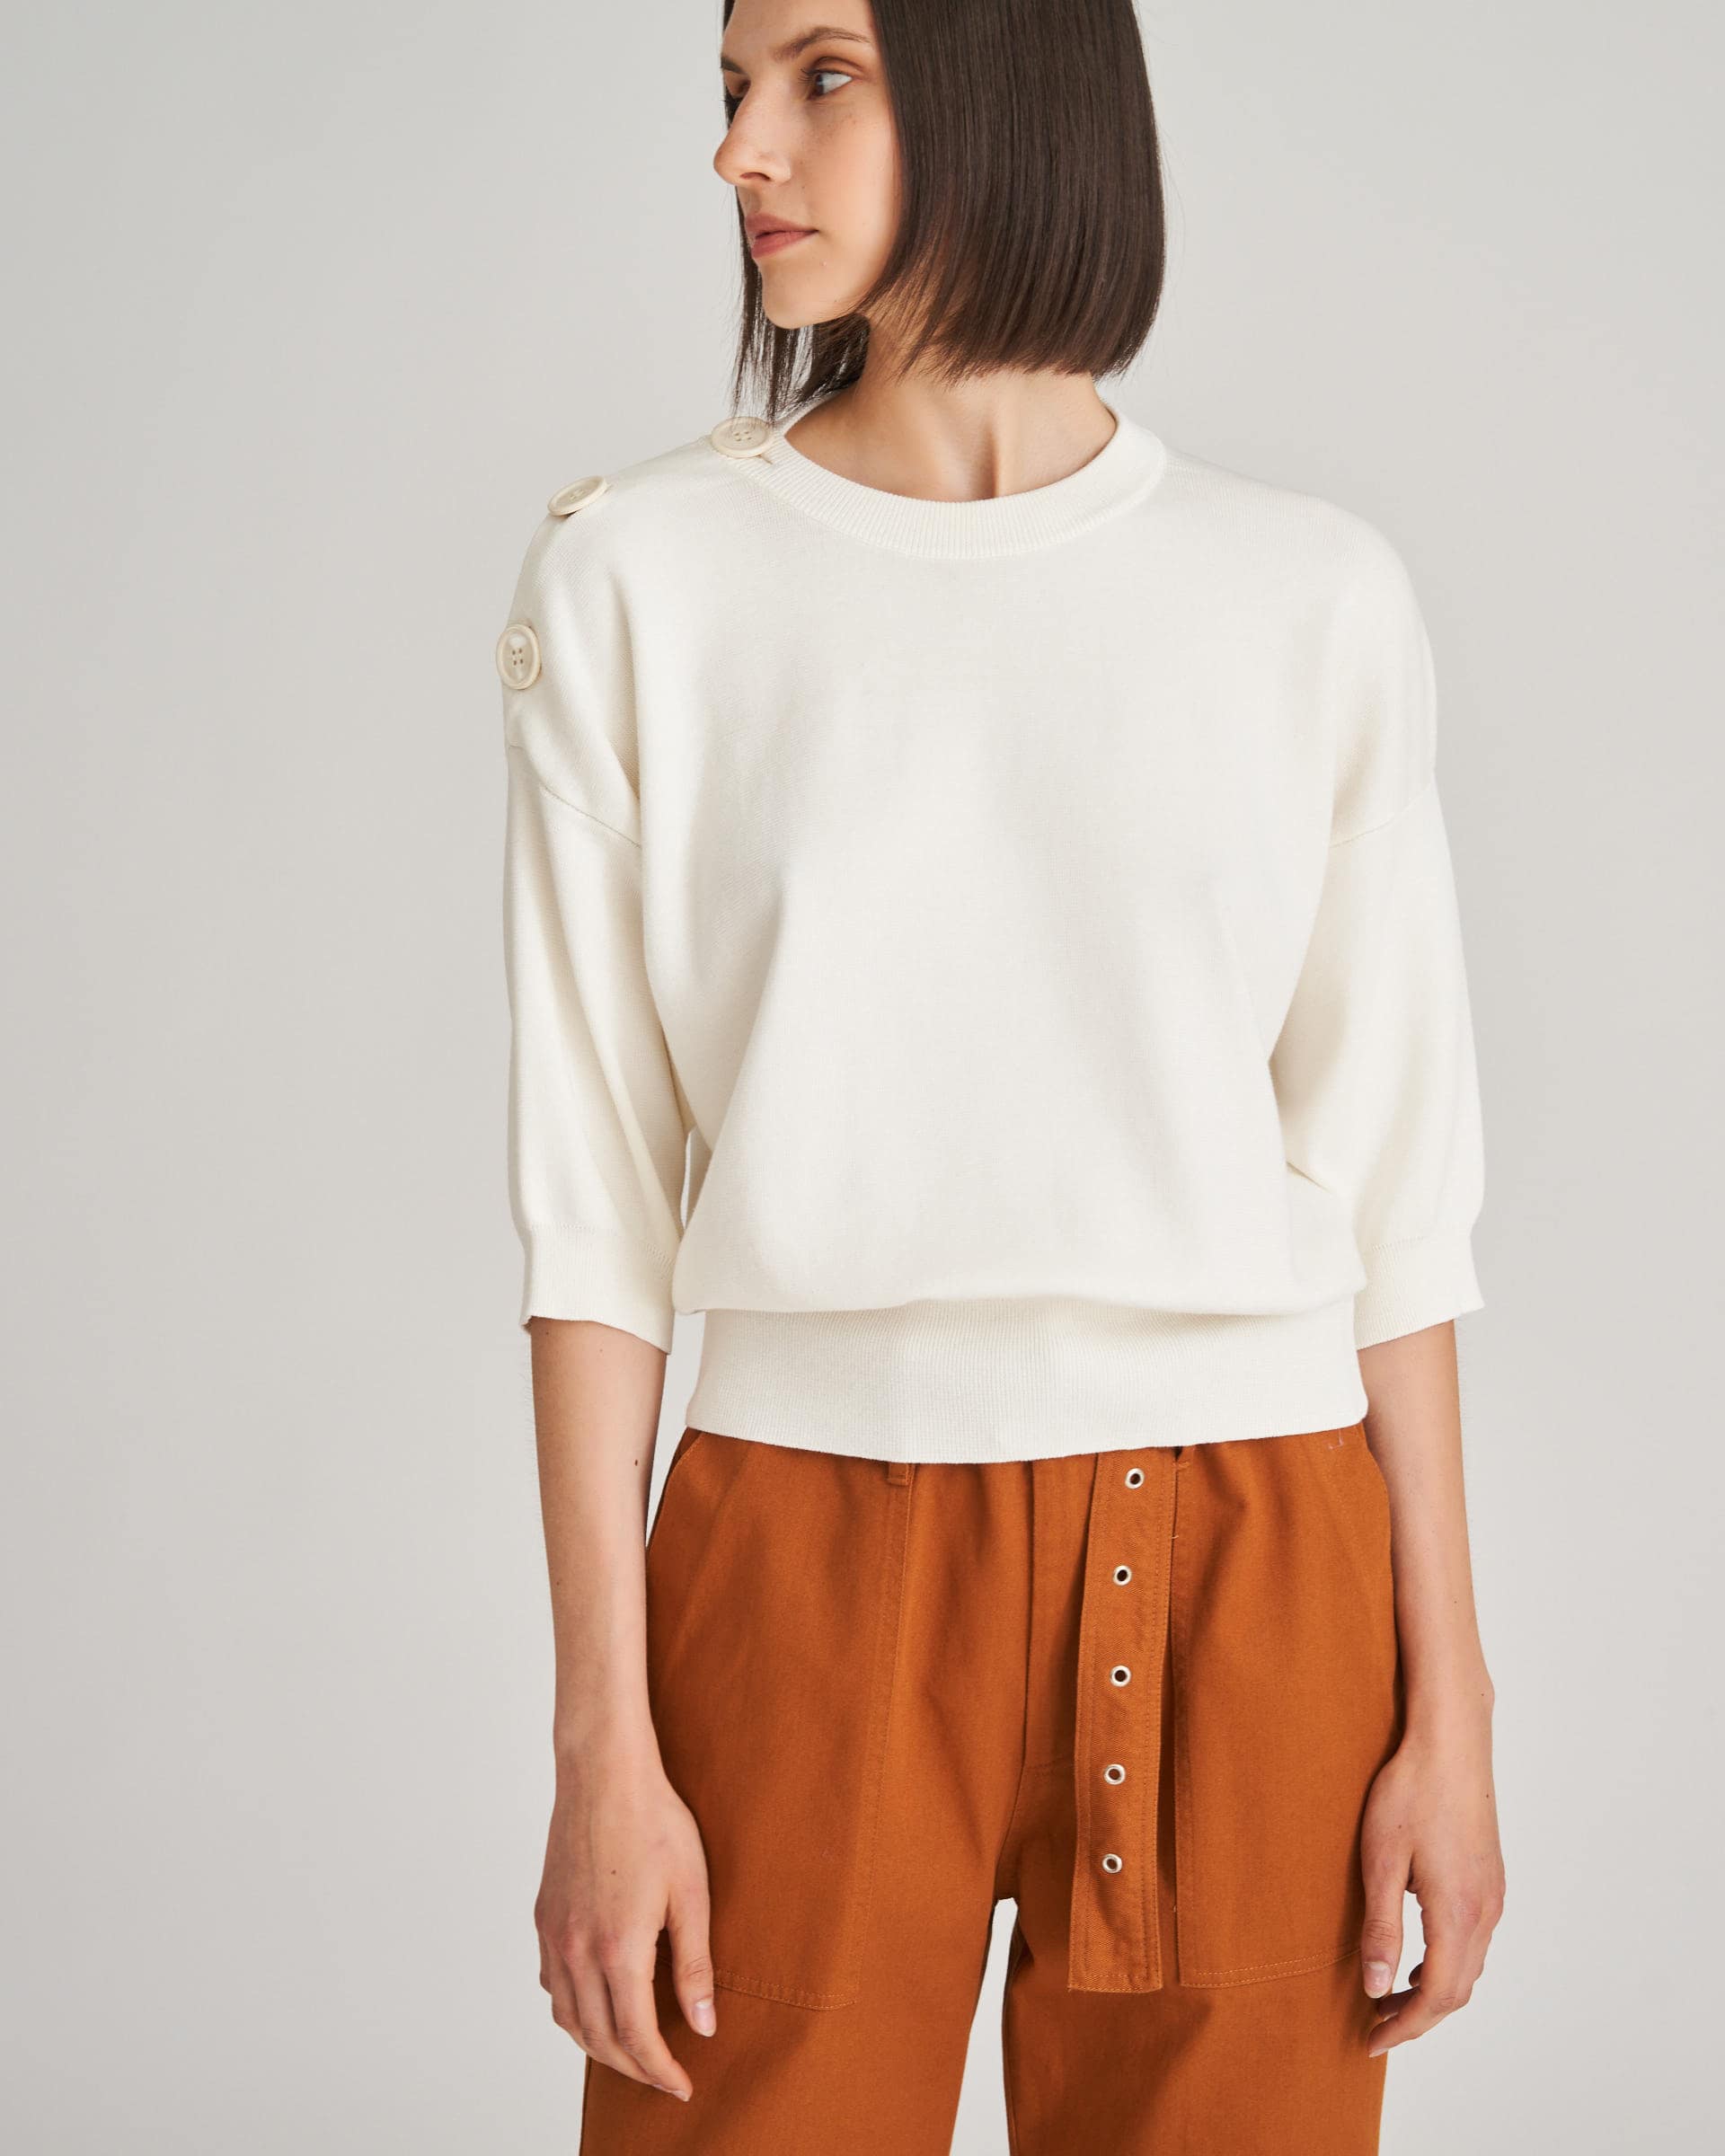 The Market Store | Crew Neck Sleeve Buttons On Shoulder